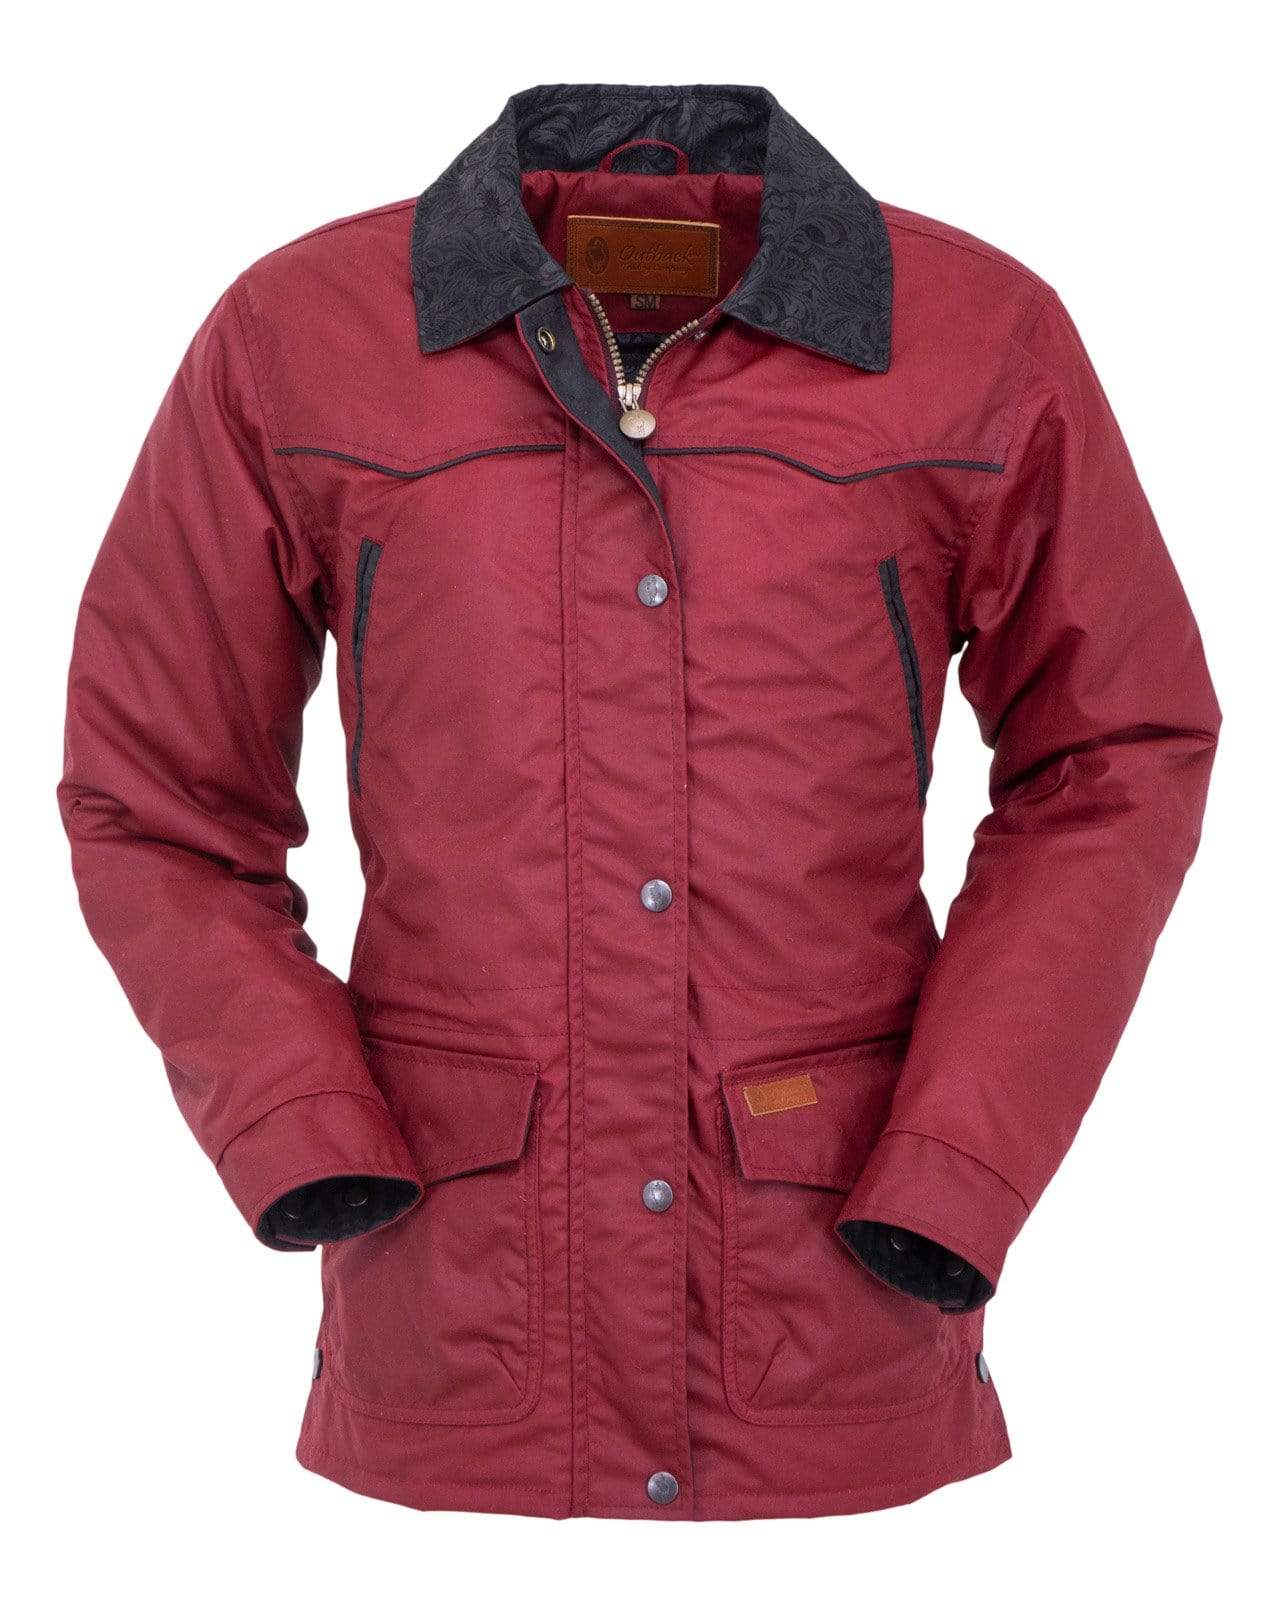 Women's Junee Jacket | Jackets by Outback Trading Company